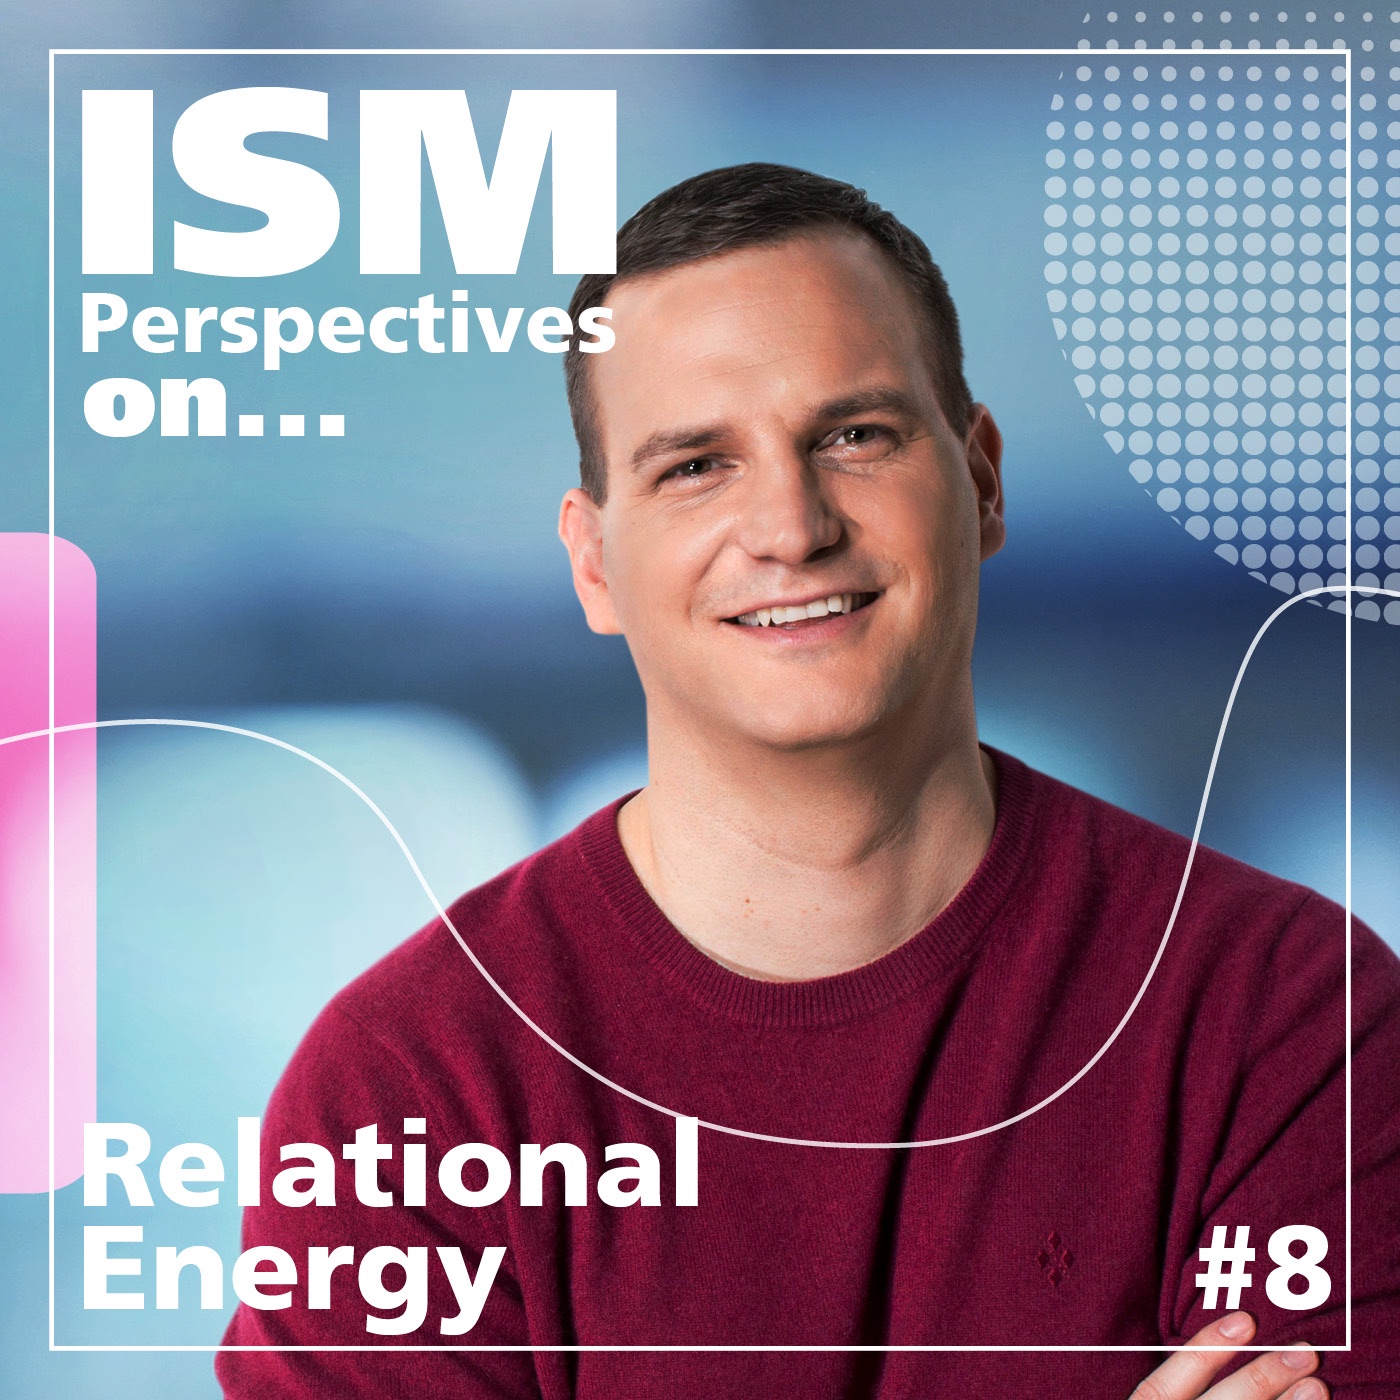 Perspectives on: Relational Energy